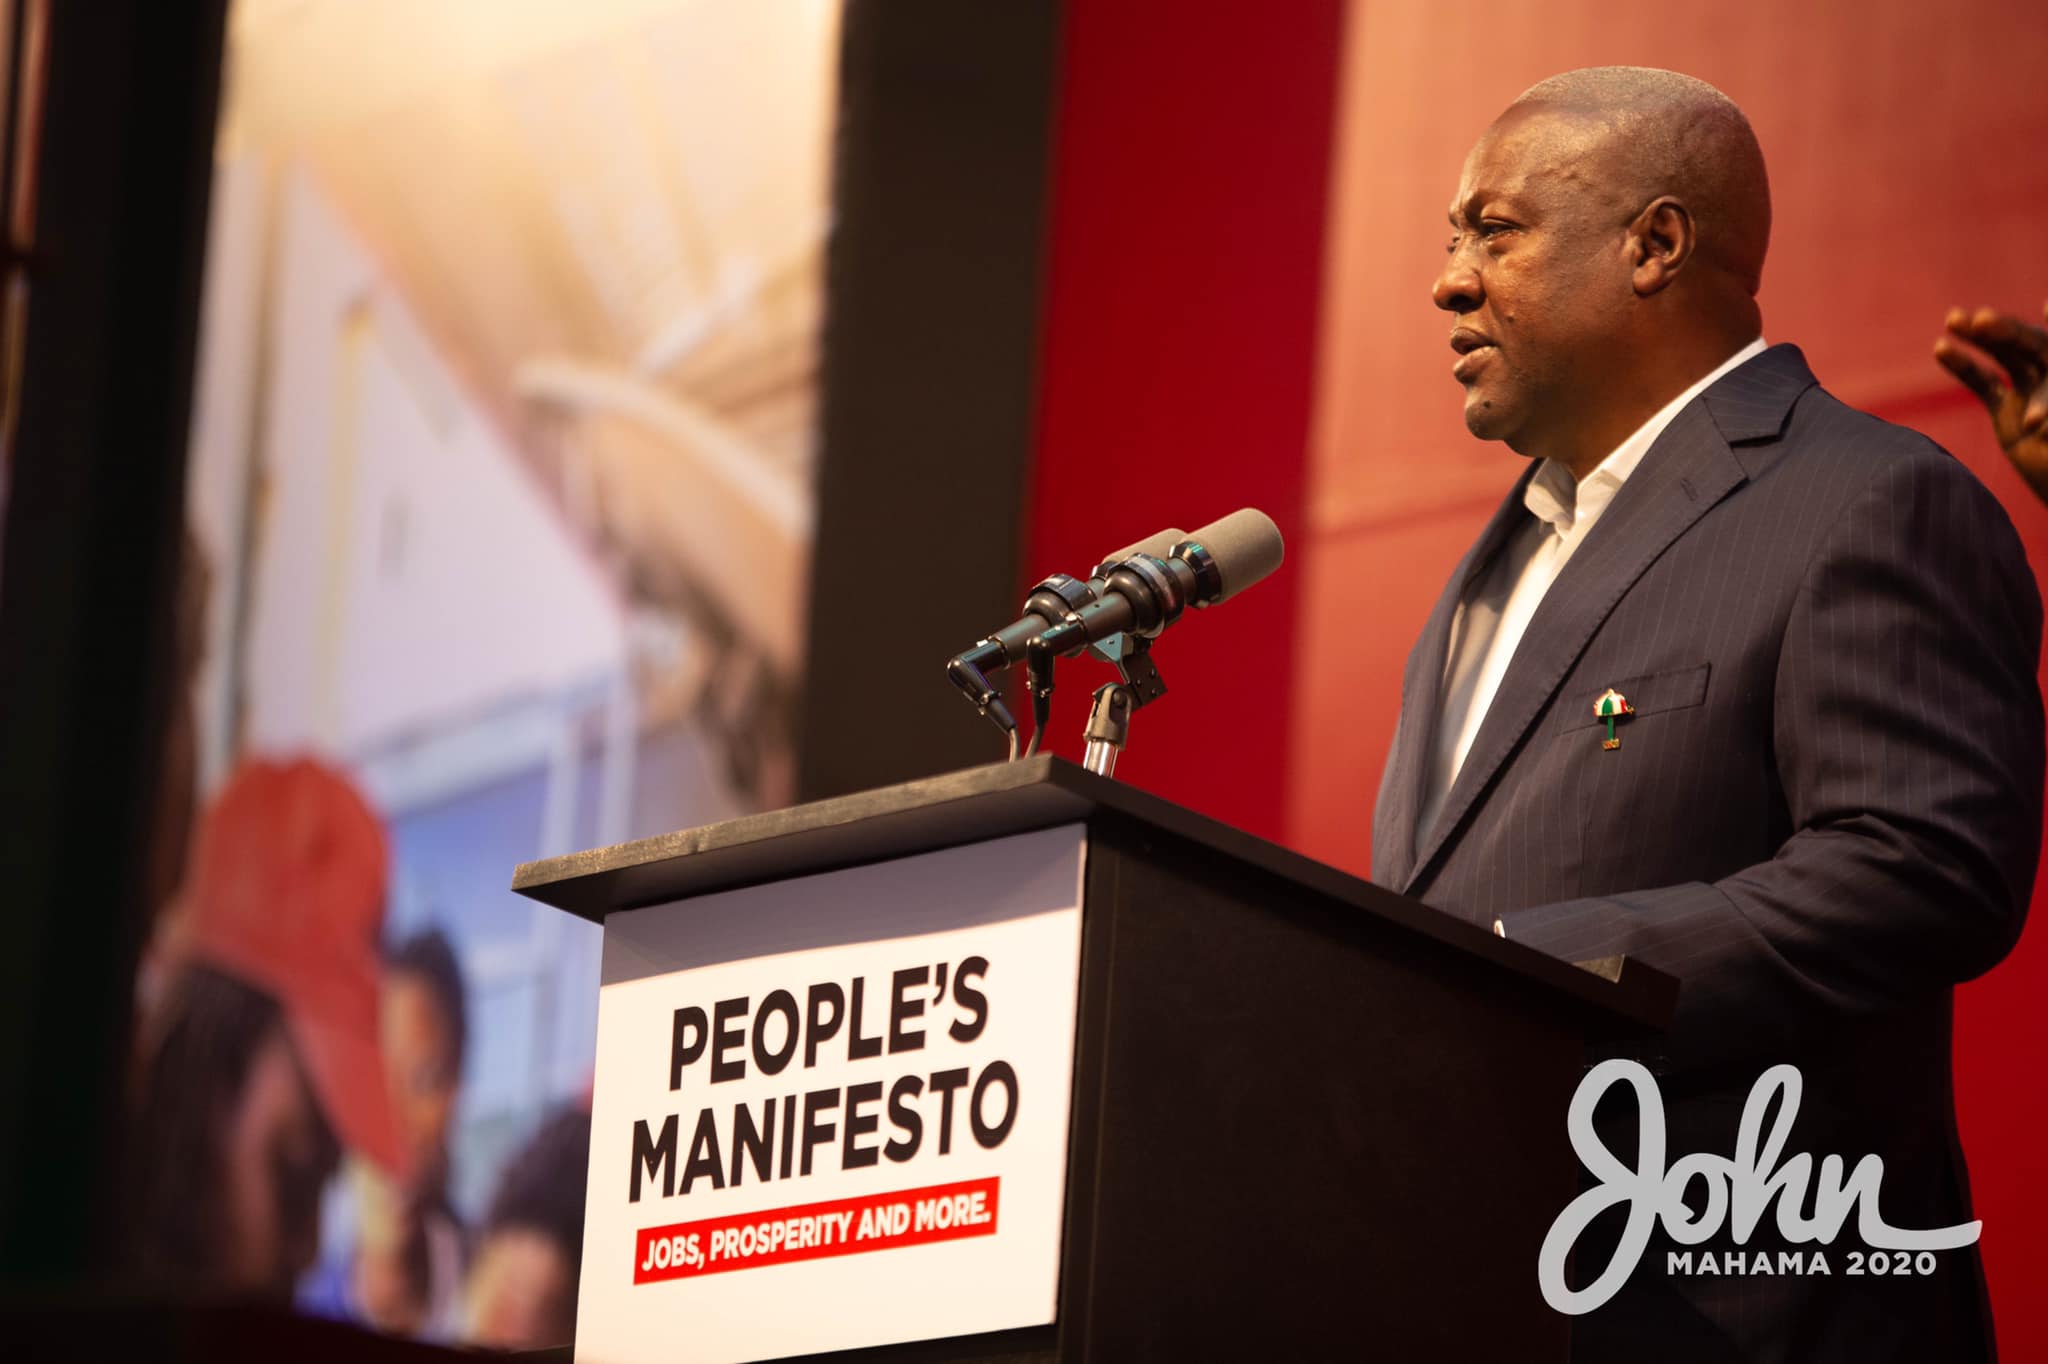 Mahama would win election 2020 with 62% if elections were held today – Poll 59